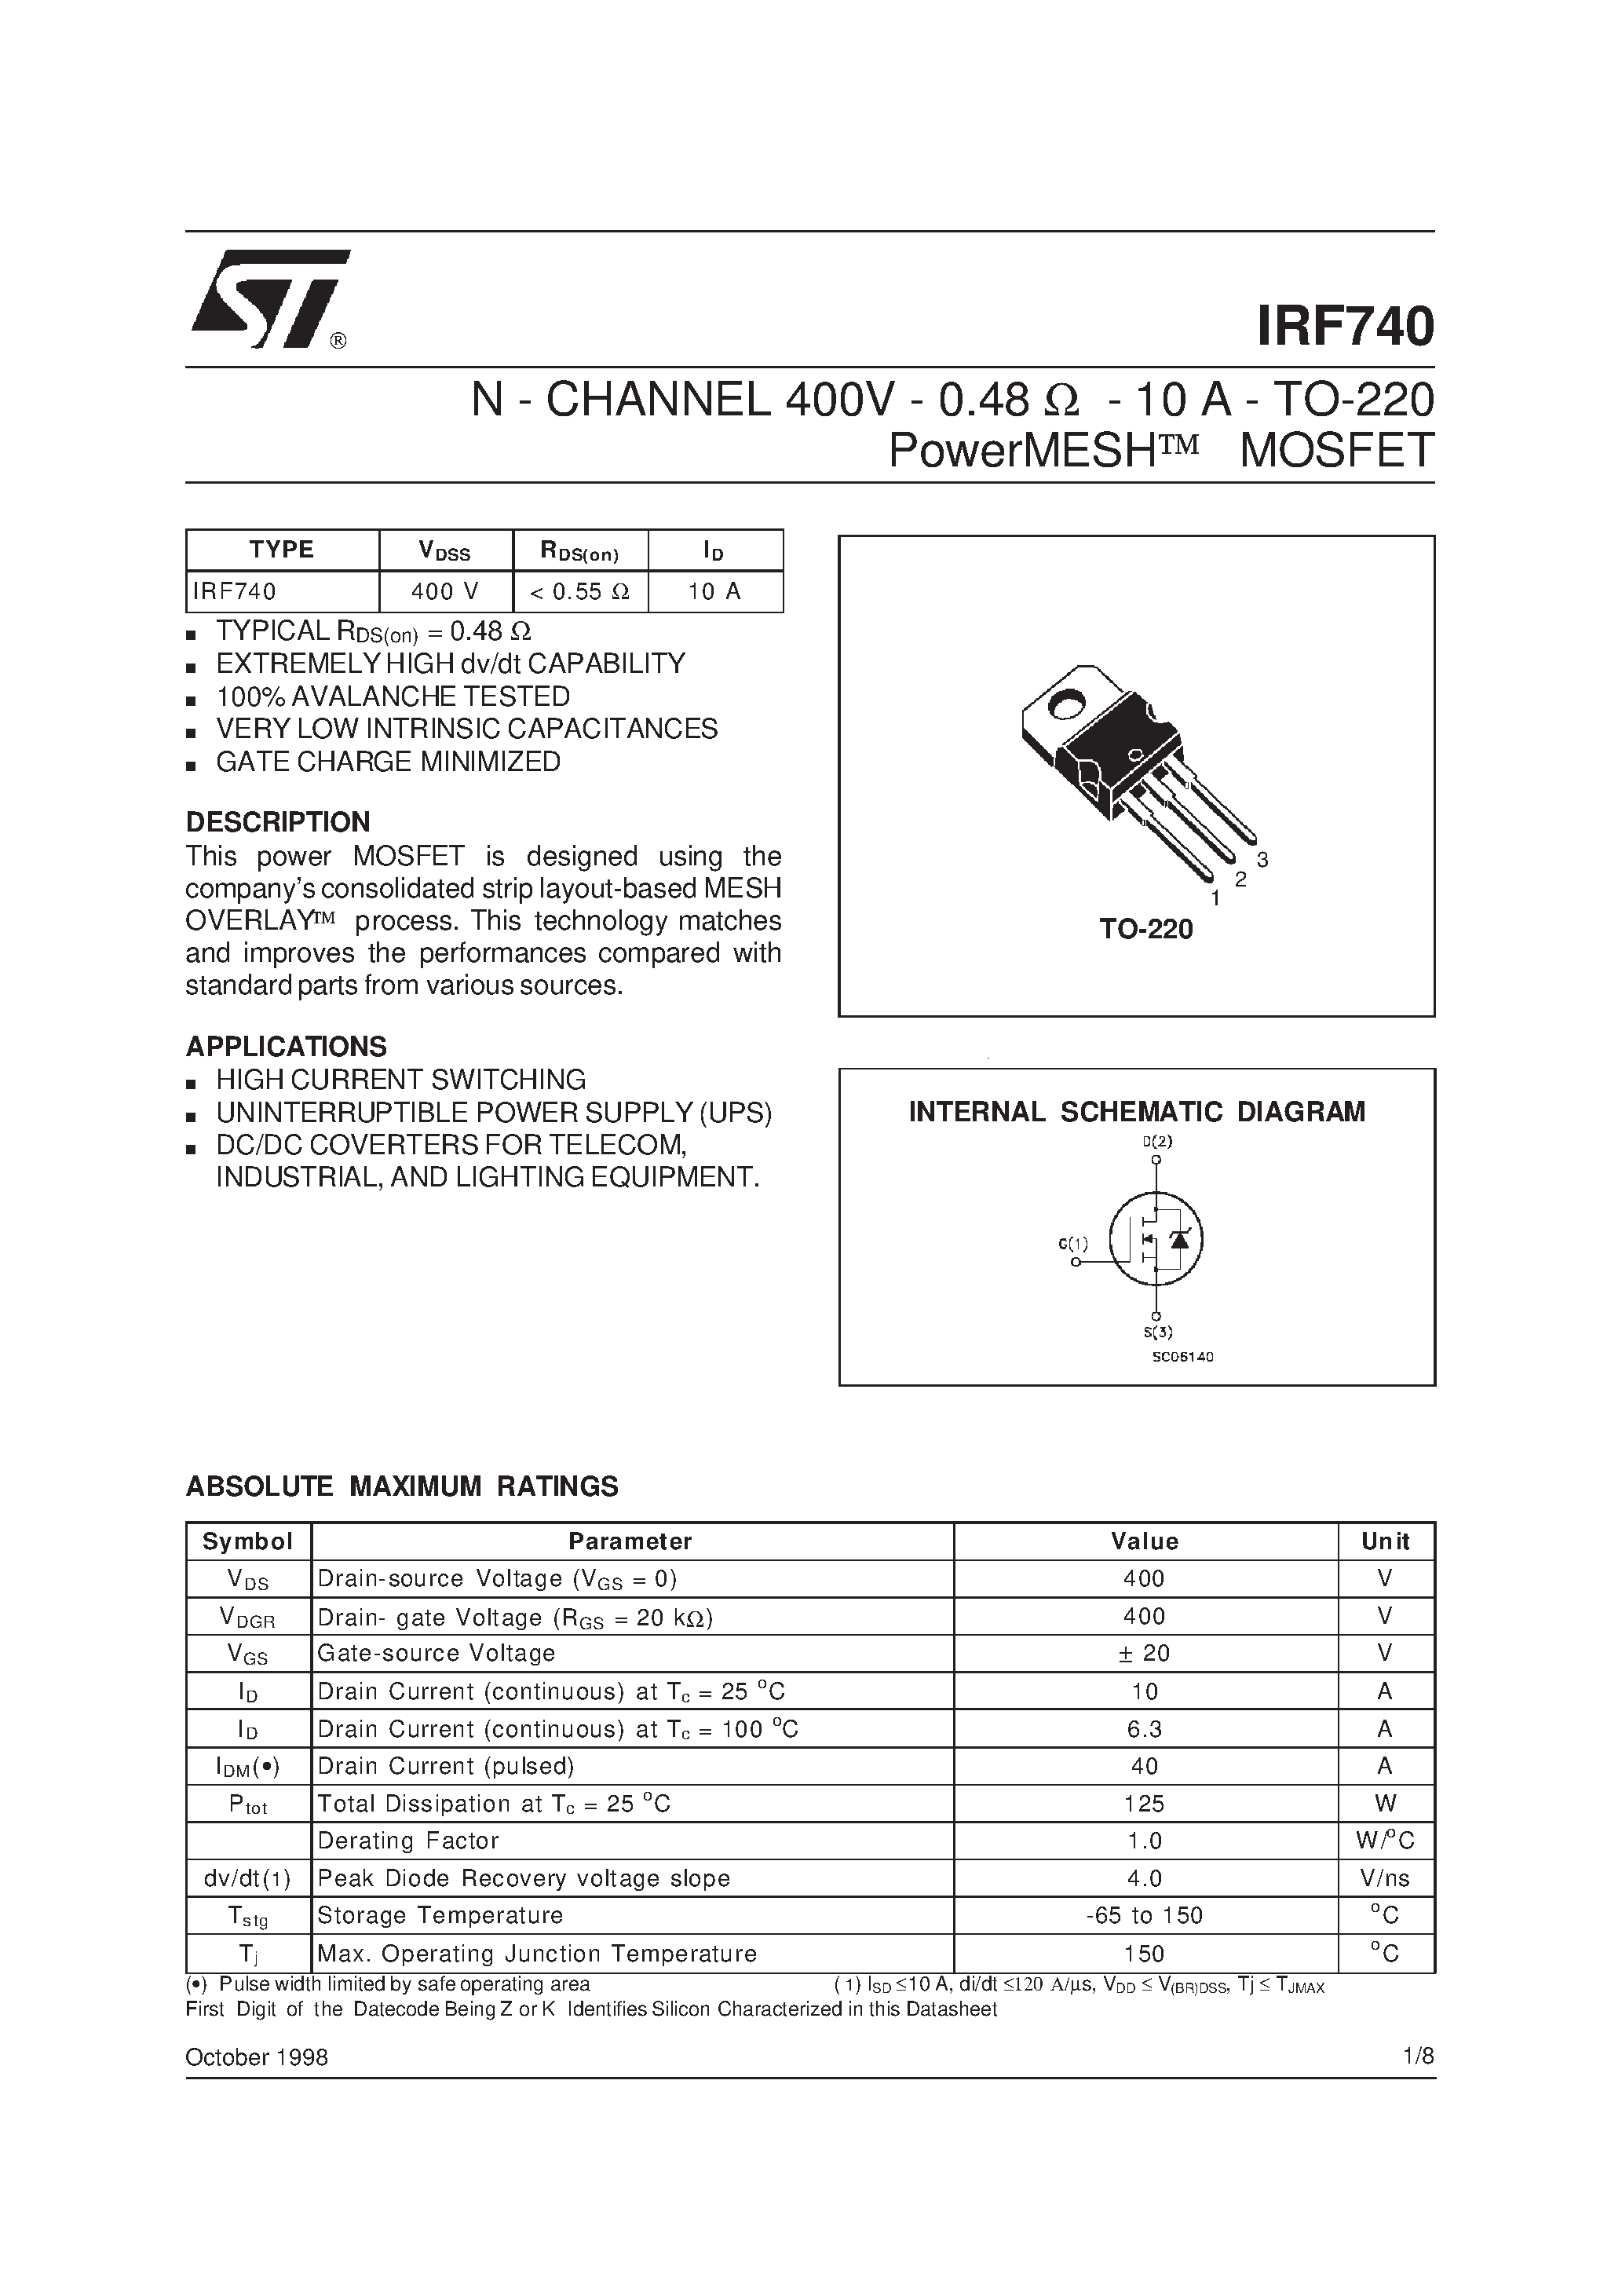 Datasheet IRF740 - N - CHANNEL 400V - 0.48 ohm - 10 A - TO-220 PowerMESH] MOSFET page 1